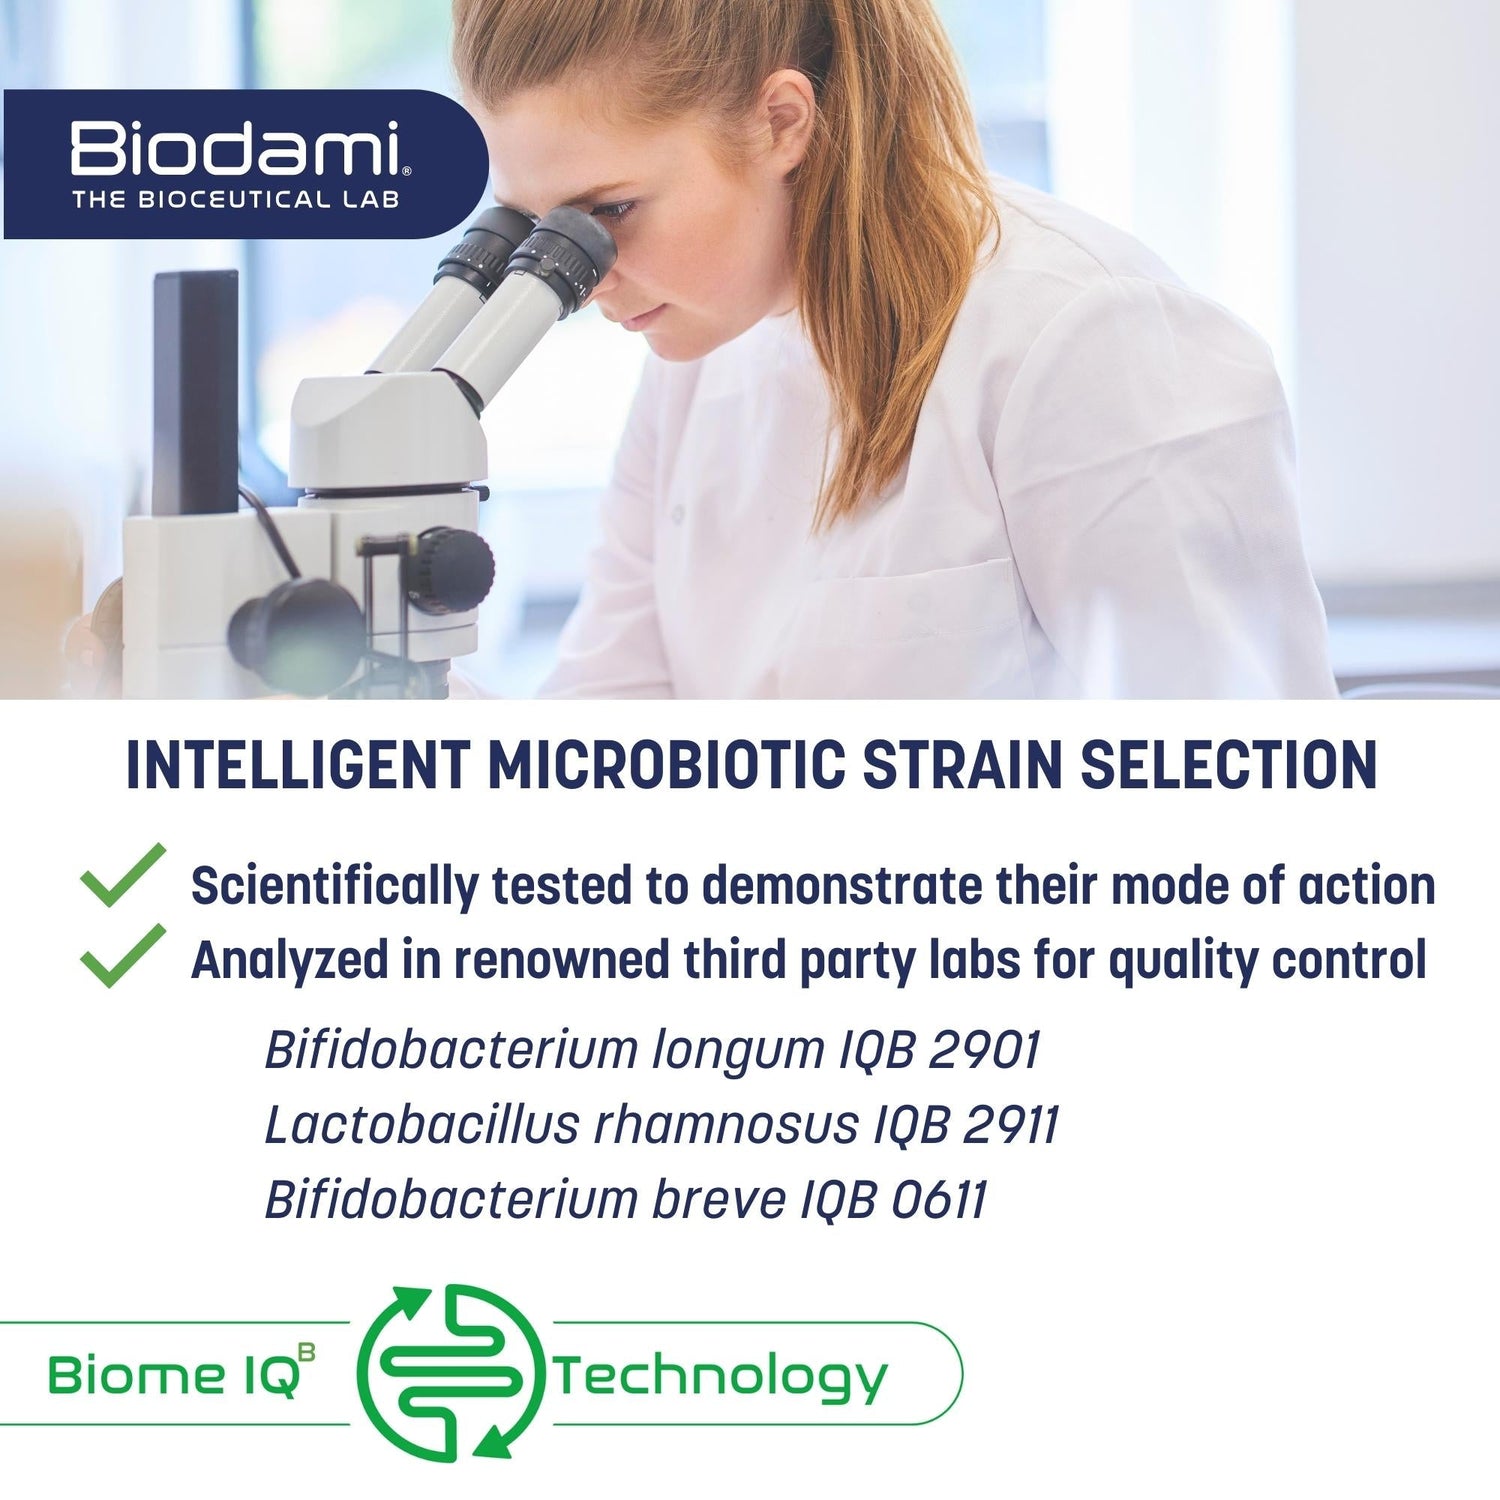 laboratory setting, intelligent probiotic strain selection. Biome IQB Technology. Scientificalyl tested to demonstrate mode of action. Quality control 